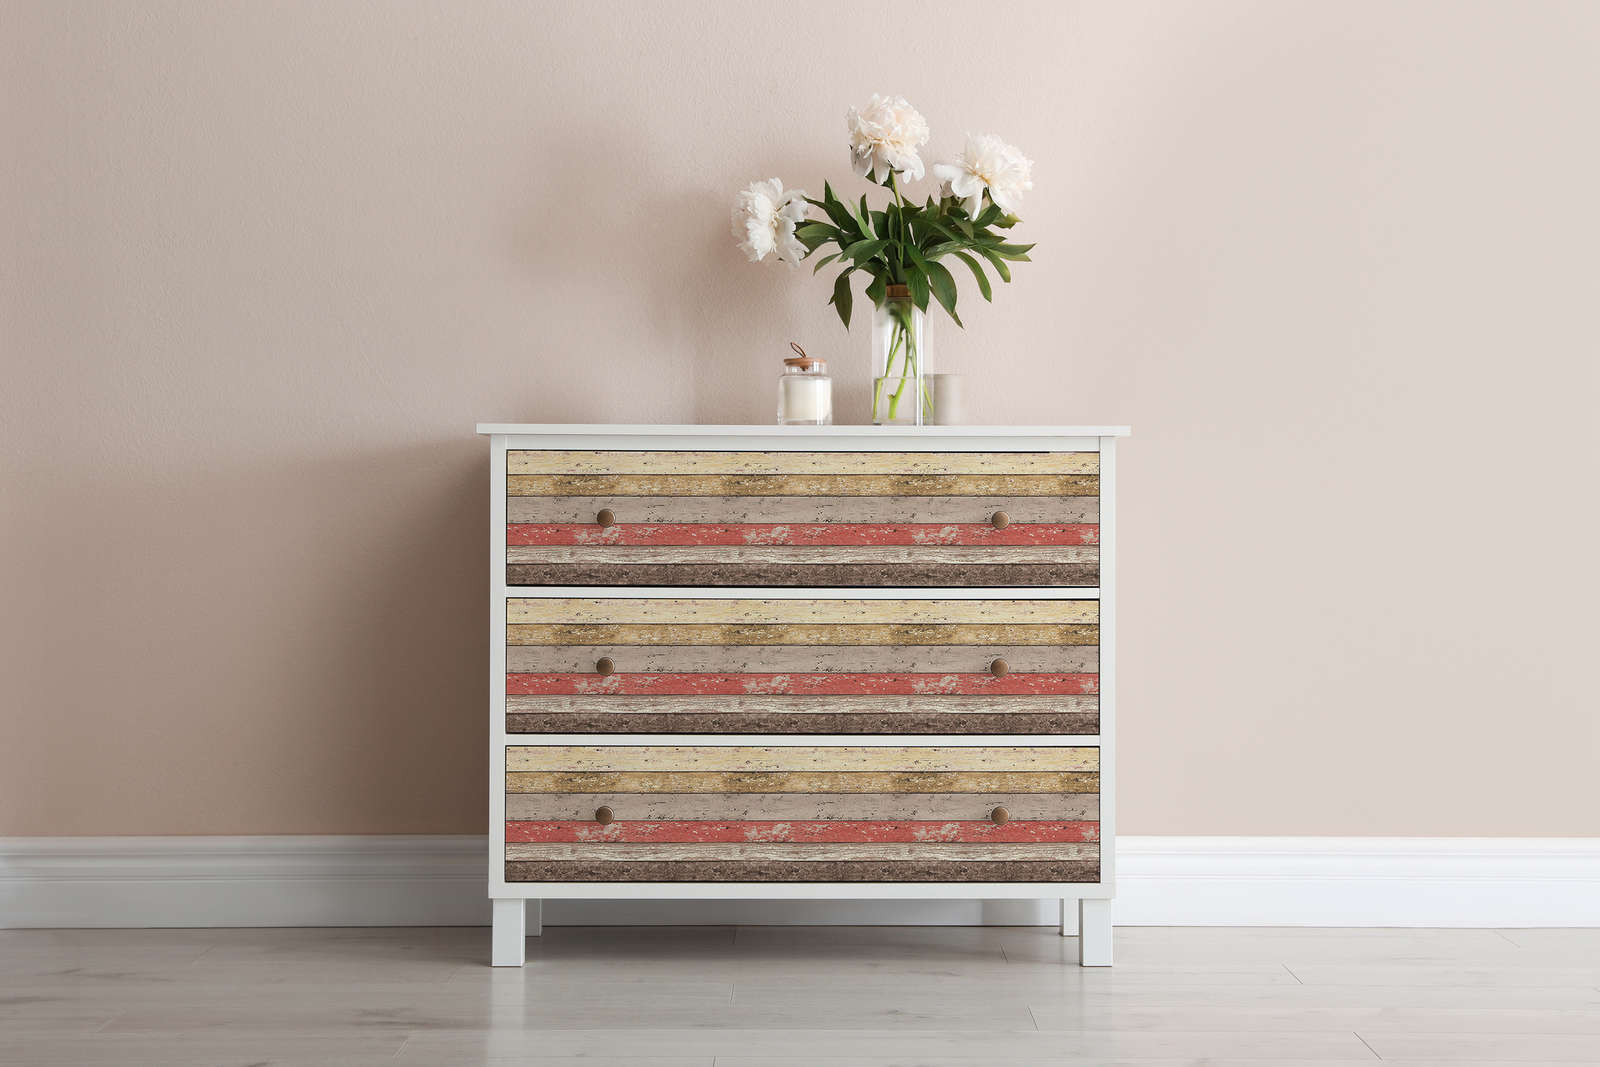             Non-woven wallpaper wood boards in Shabby Chic style - brown, red
        